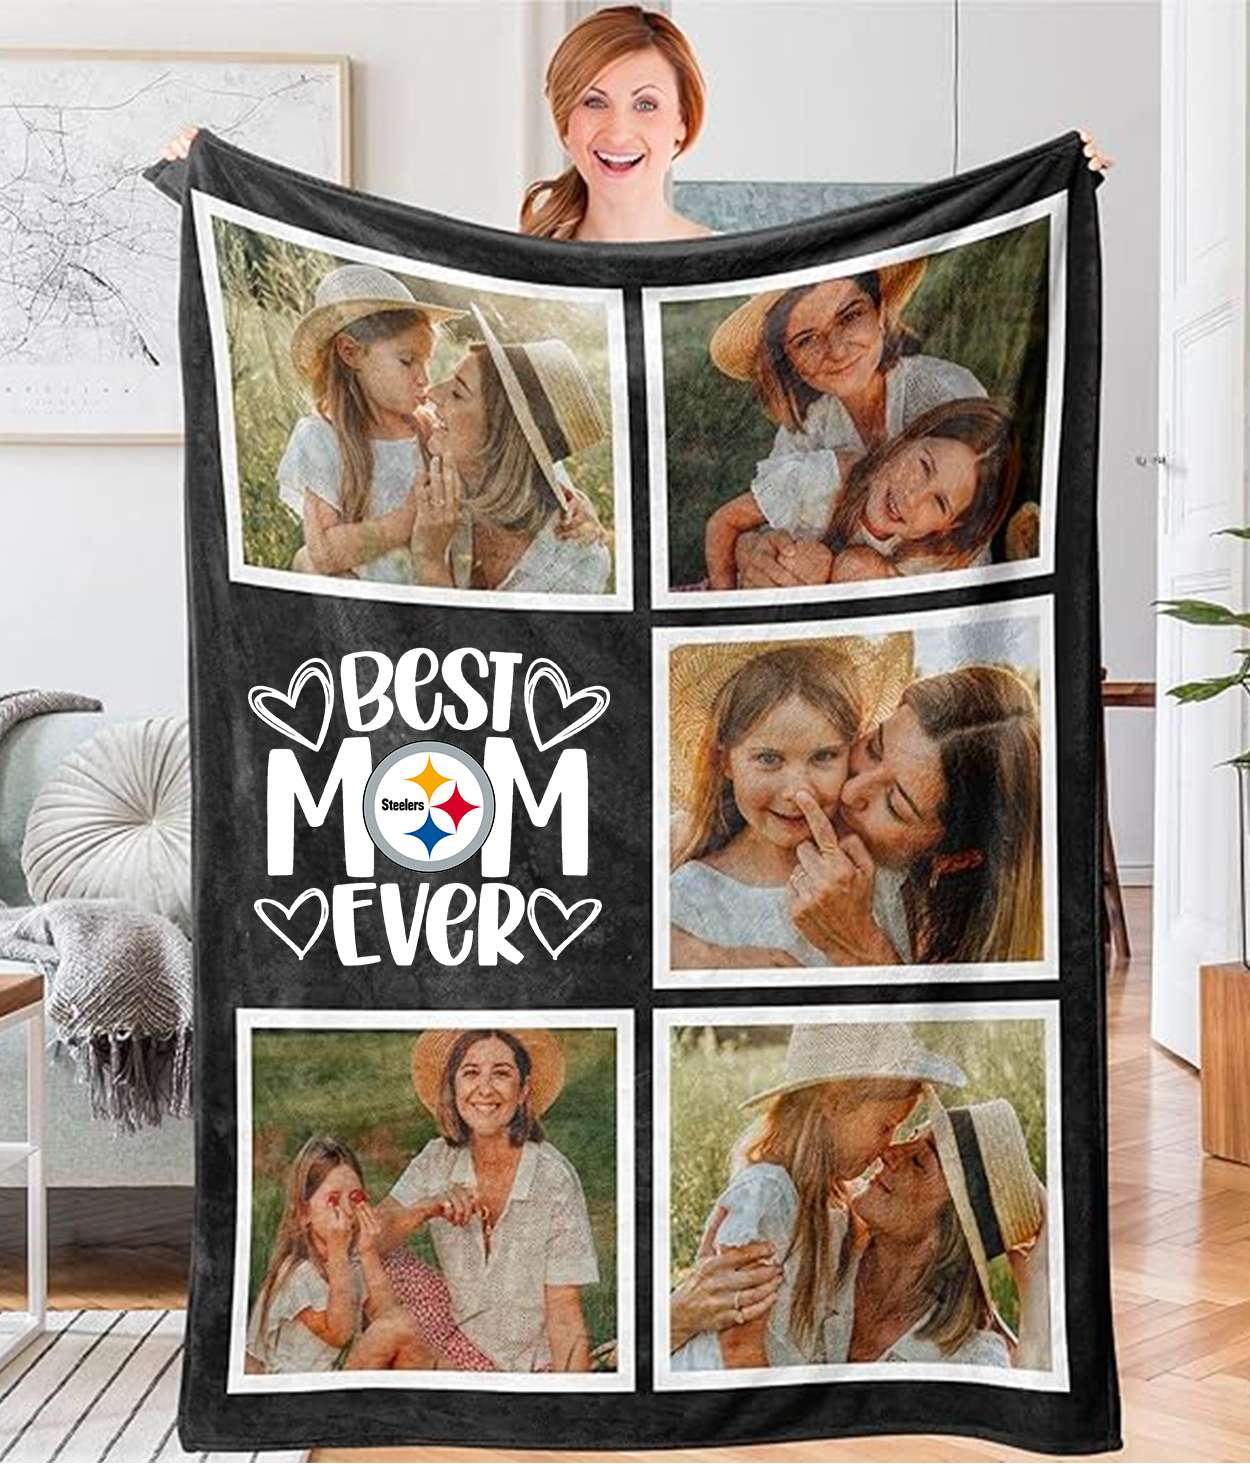 Best Mom Ever - Custom NFL Pittsburgh Steelers Blankets with Pictures for Mother's Day Gift